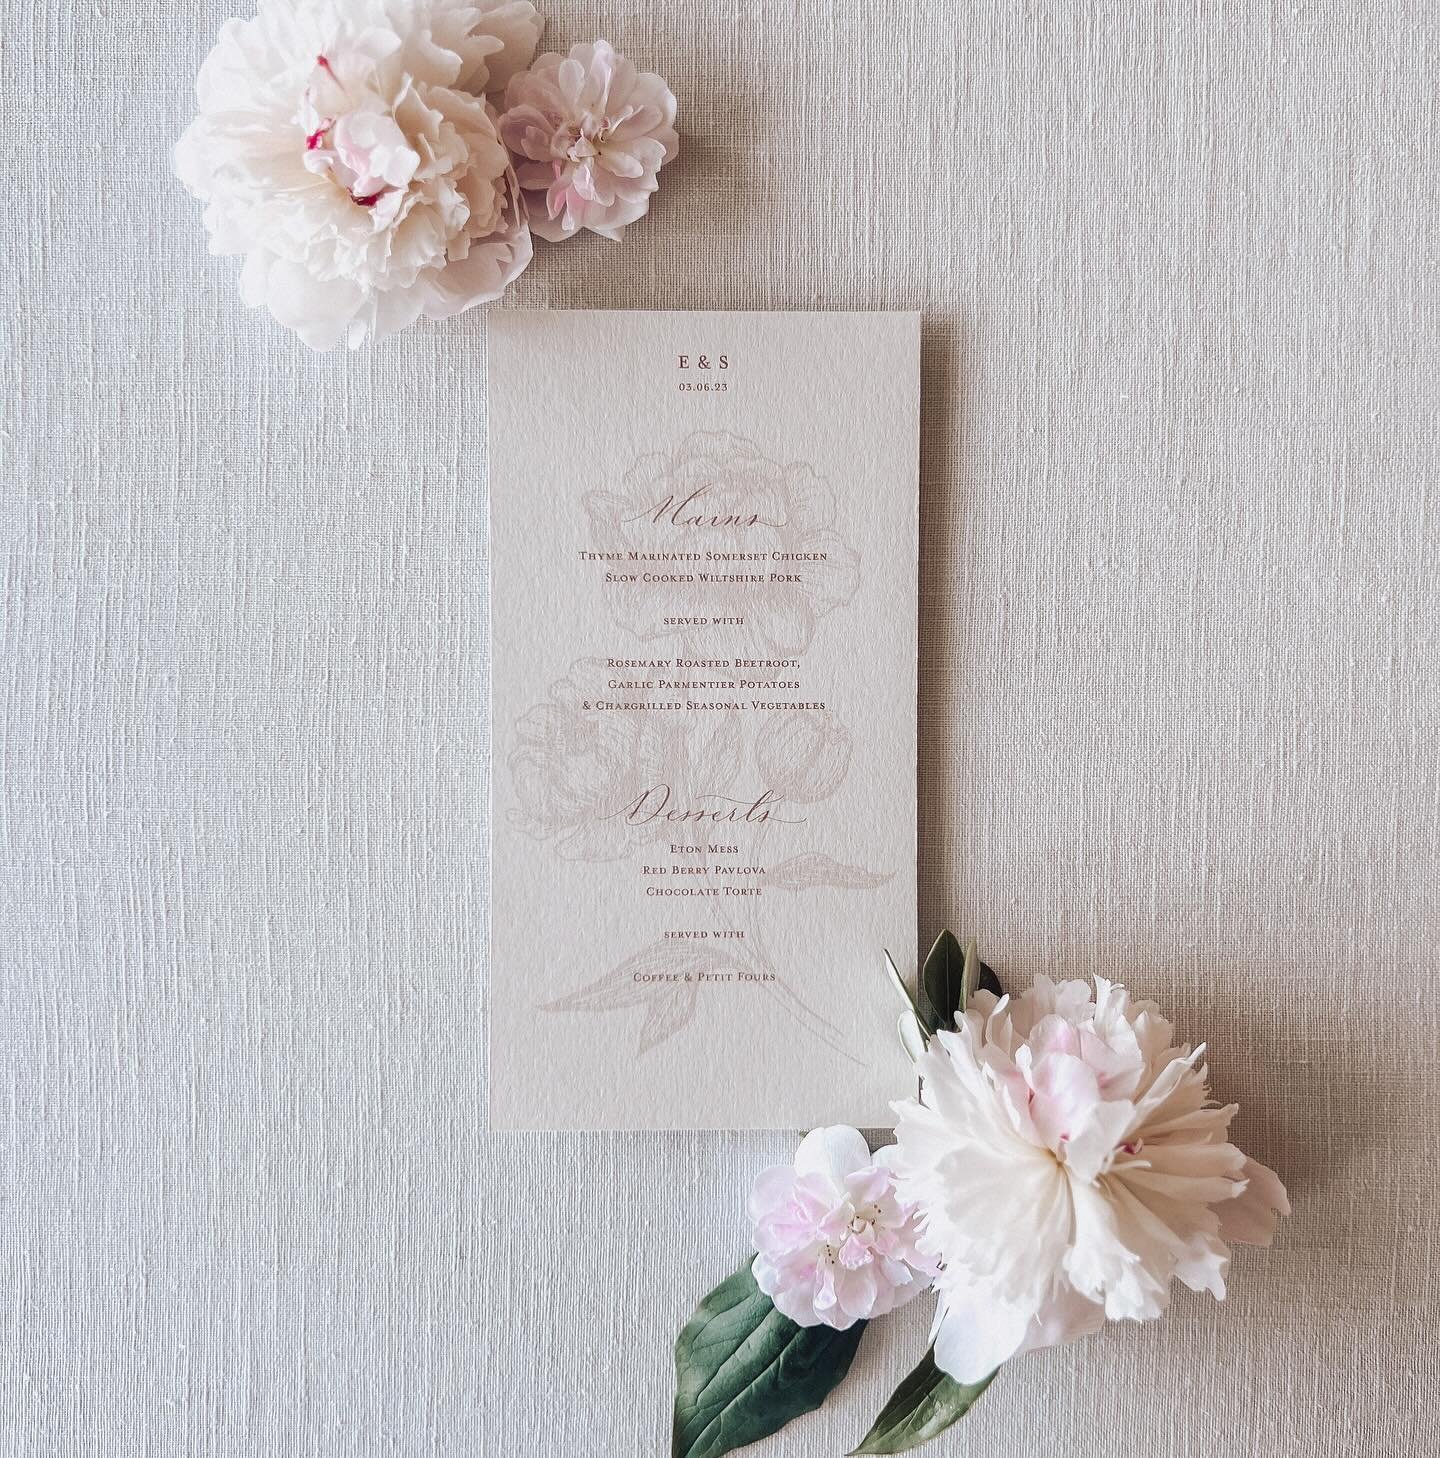 I can&rsquo;t believe it&rsquo;s May which means the peonies will be in bloom again soon and is a reminder for me that summer is just around the corner. 
.
.
.
#weddingstationery #weddingmenu #prettypaperie #peonyseason #weddingseason #dottheiatelier